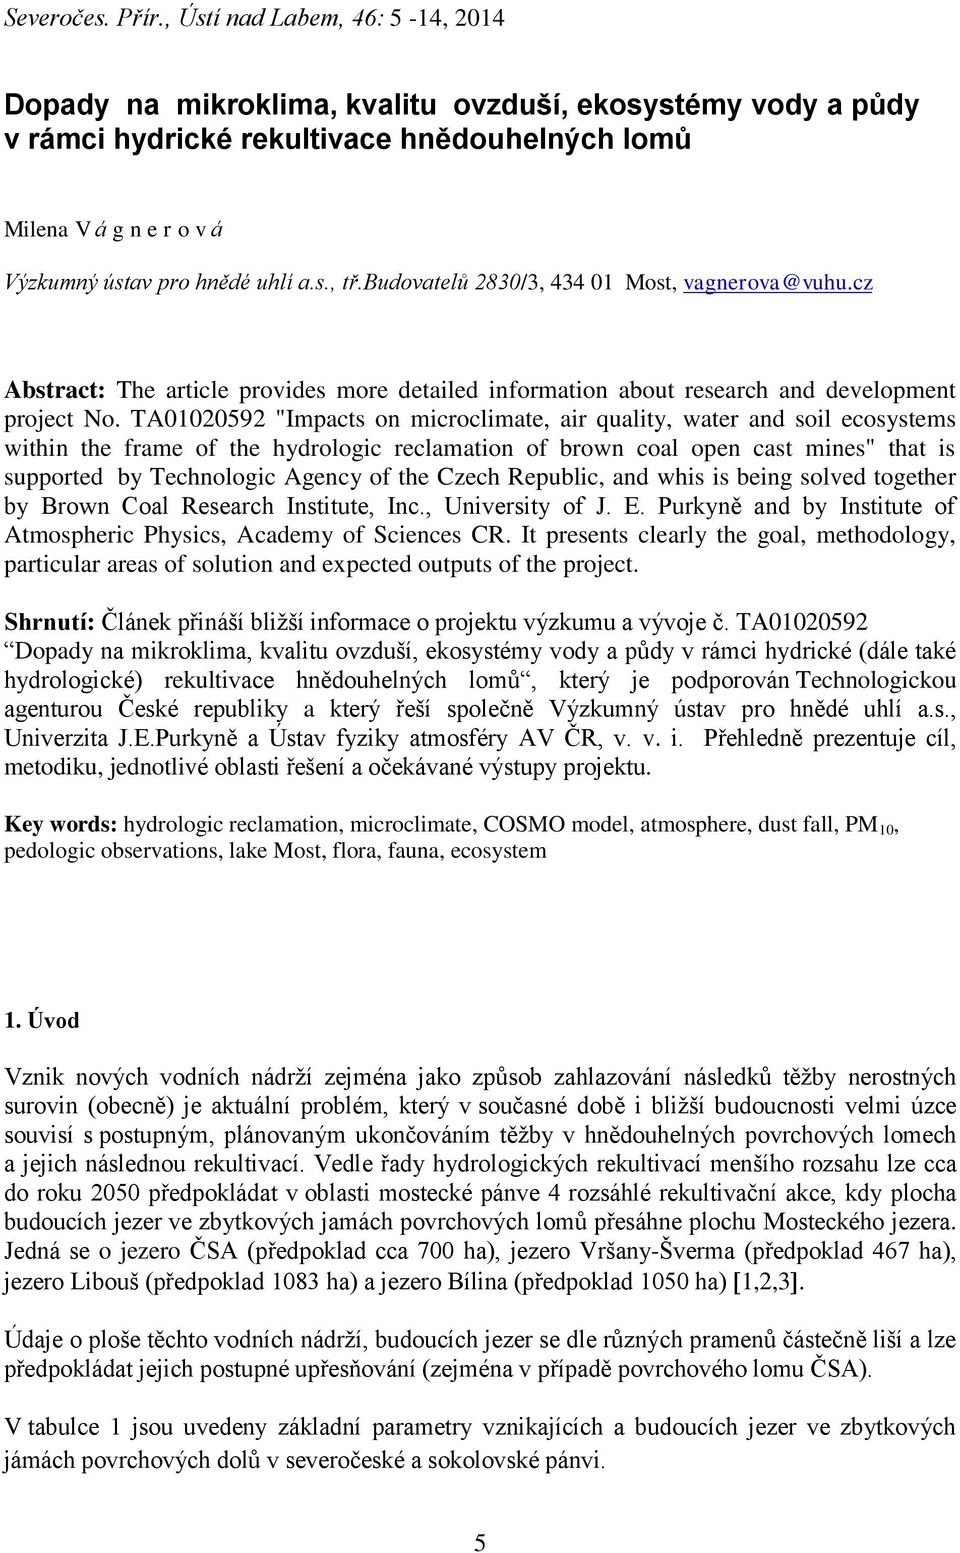 s., tř.budovatelů 2830/3, 434 01 Most, vagnerova@vuhu.cz Abstract: The article provides more detailed information about research and development project No.